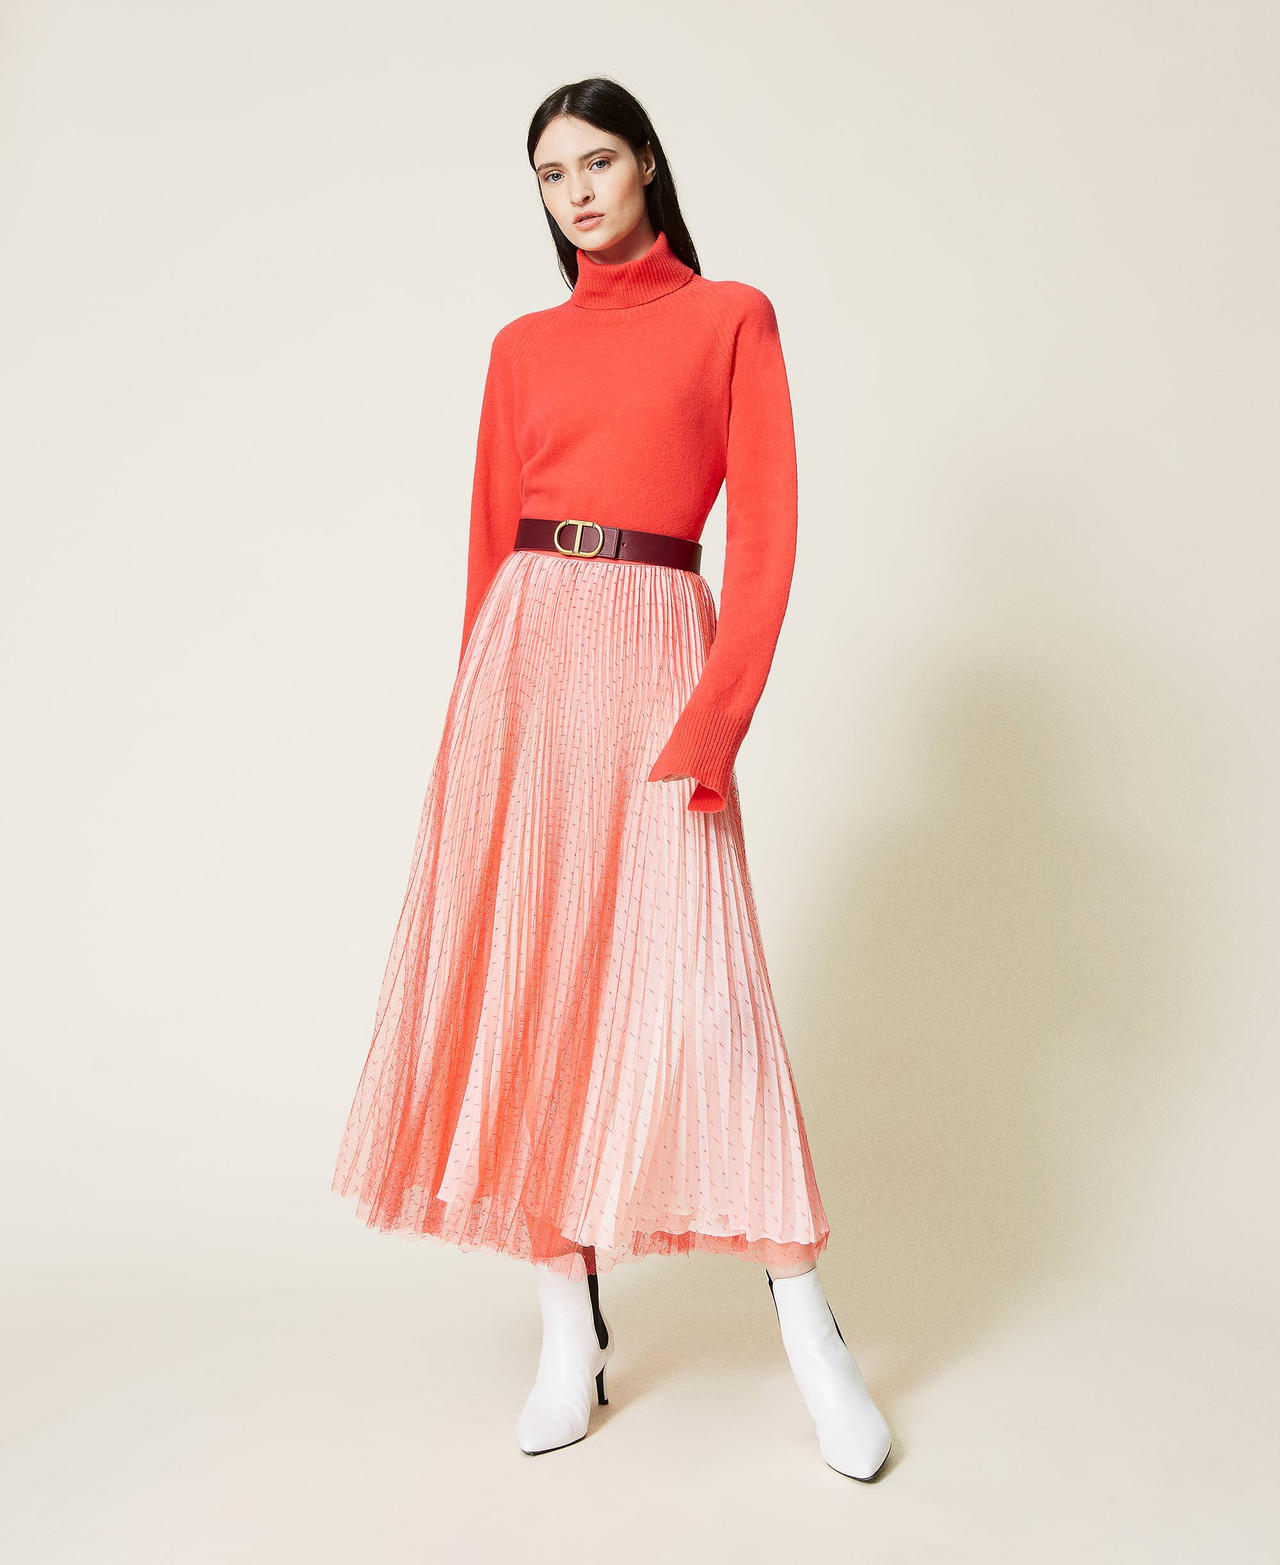 Wool and cashmere jumper "Coral Candy” Red Woman 212TT3120-02